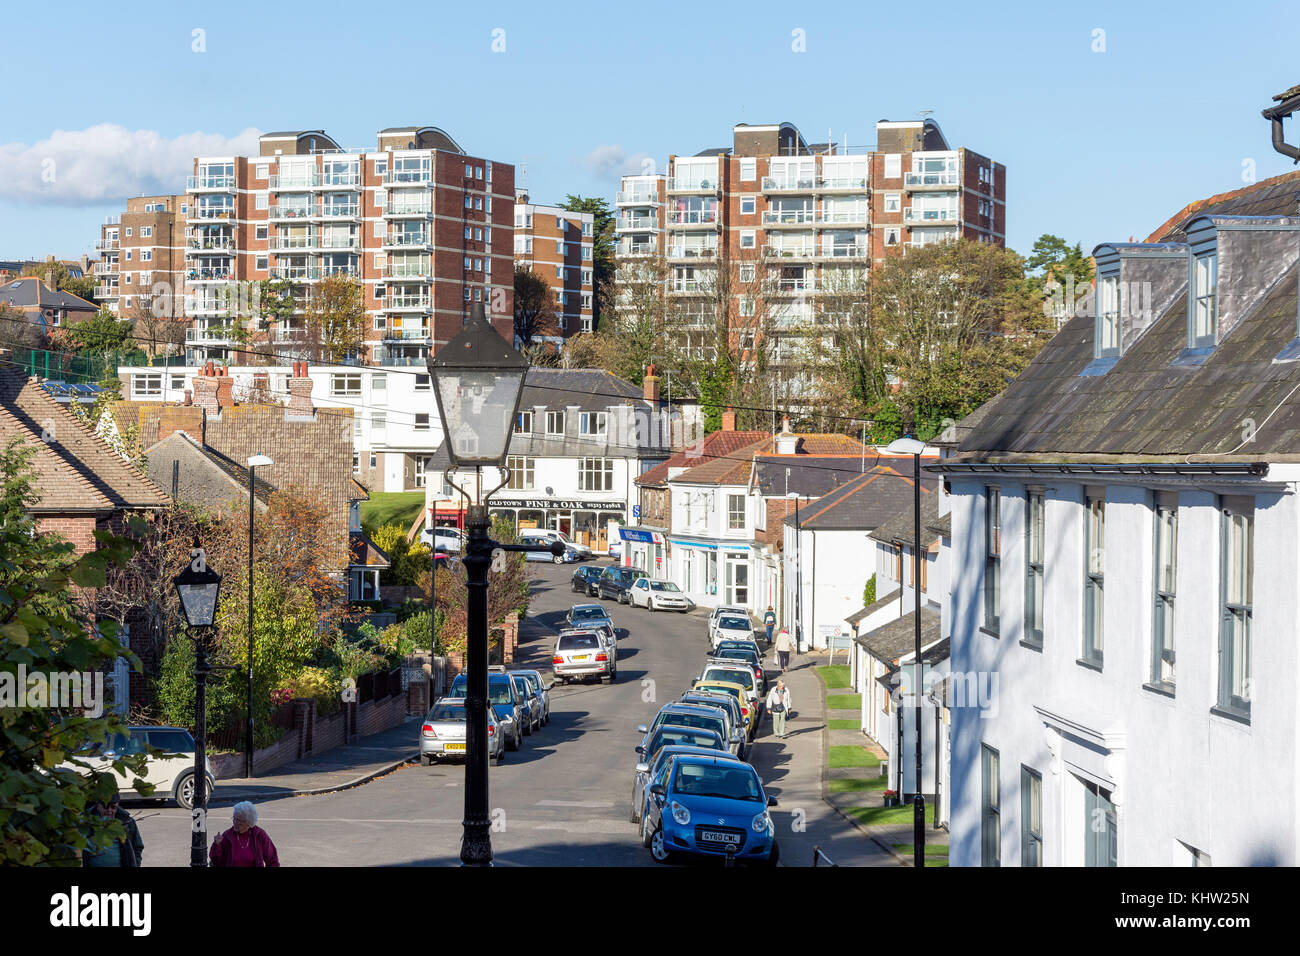 High-rise apartment buildings from Ocklynge Road, Old Town, Eastbourne, East Sussex, England, United Kingdom Stock Photo